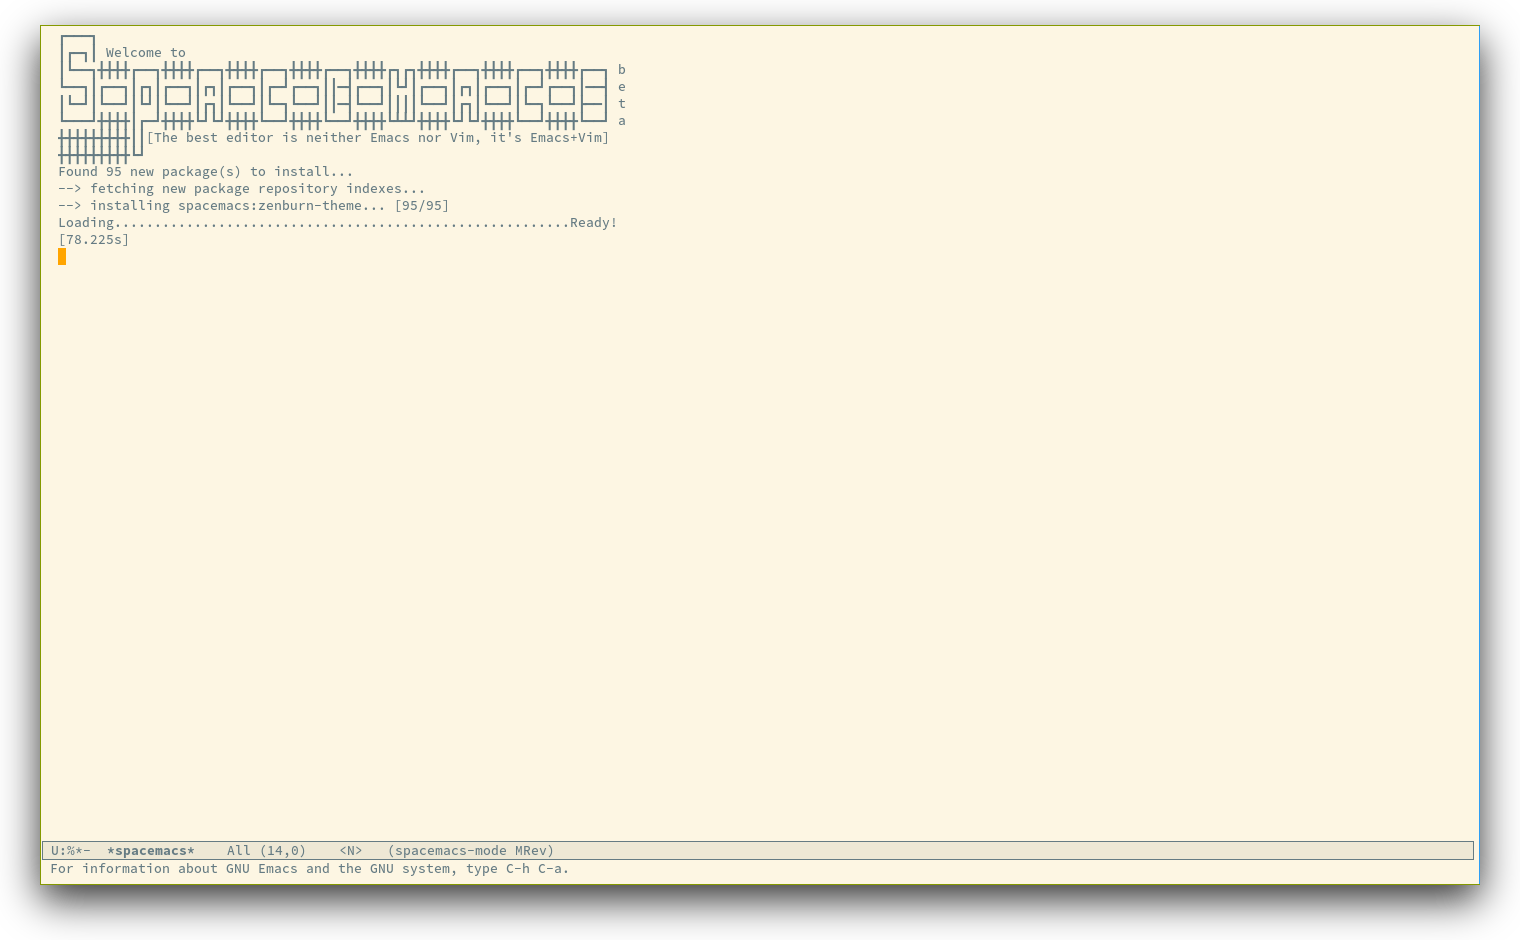 /TakeV/spacemacs/media/commit/c1b62932689611ddf9440d5ca9645b7d69c8815a/doc/img/spacemacs-startup.png